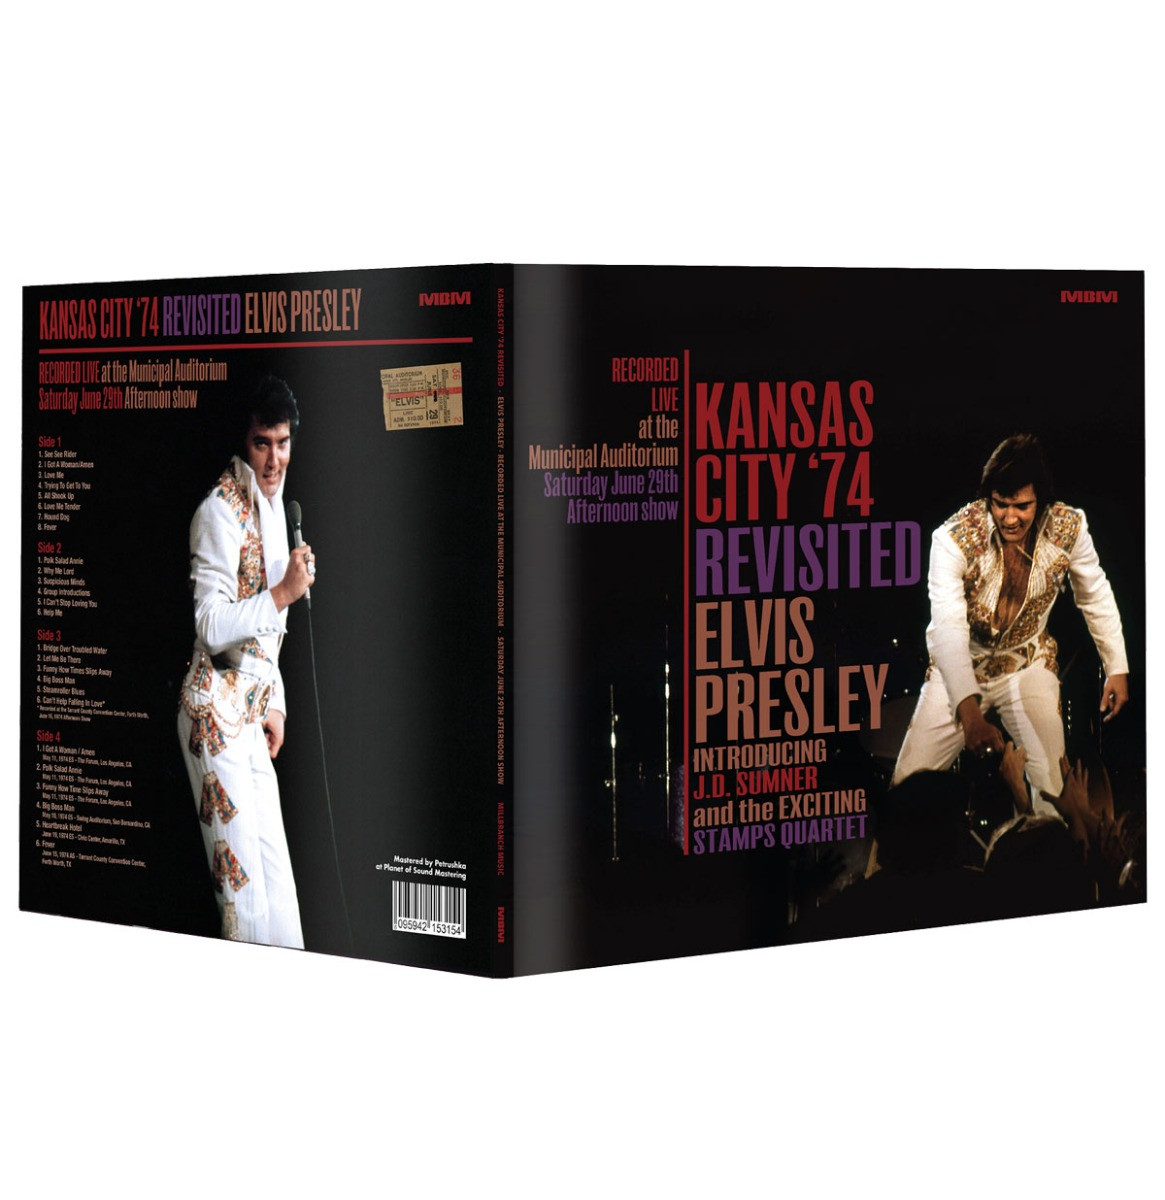 Elvis Presley - Kansas City &apos;74 Revisited Afternoon Show 2 LP - CLEAR VINYL